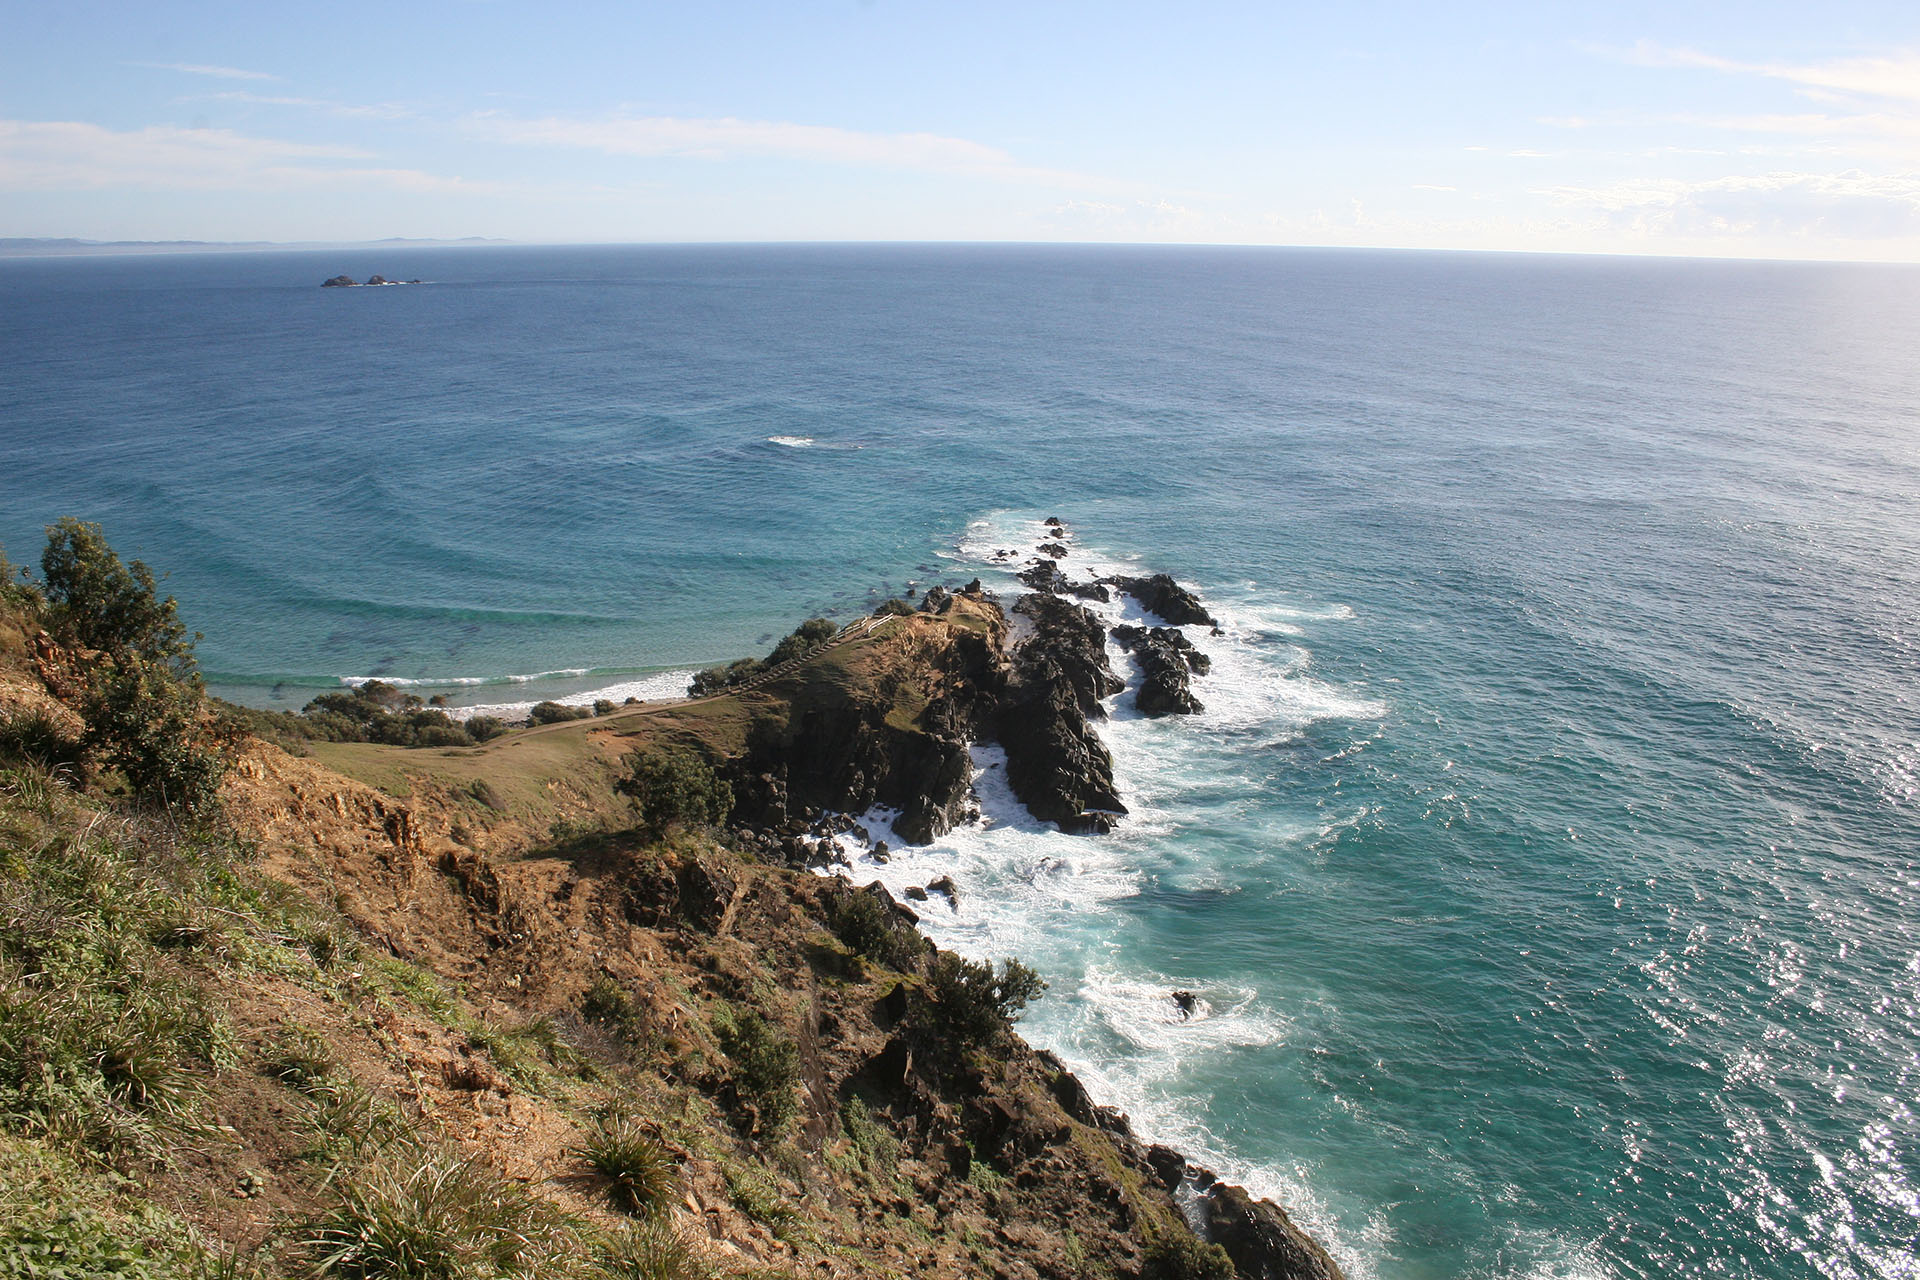 Cape Byron. Nothing but New Zealand beyond the horizon.